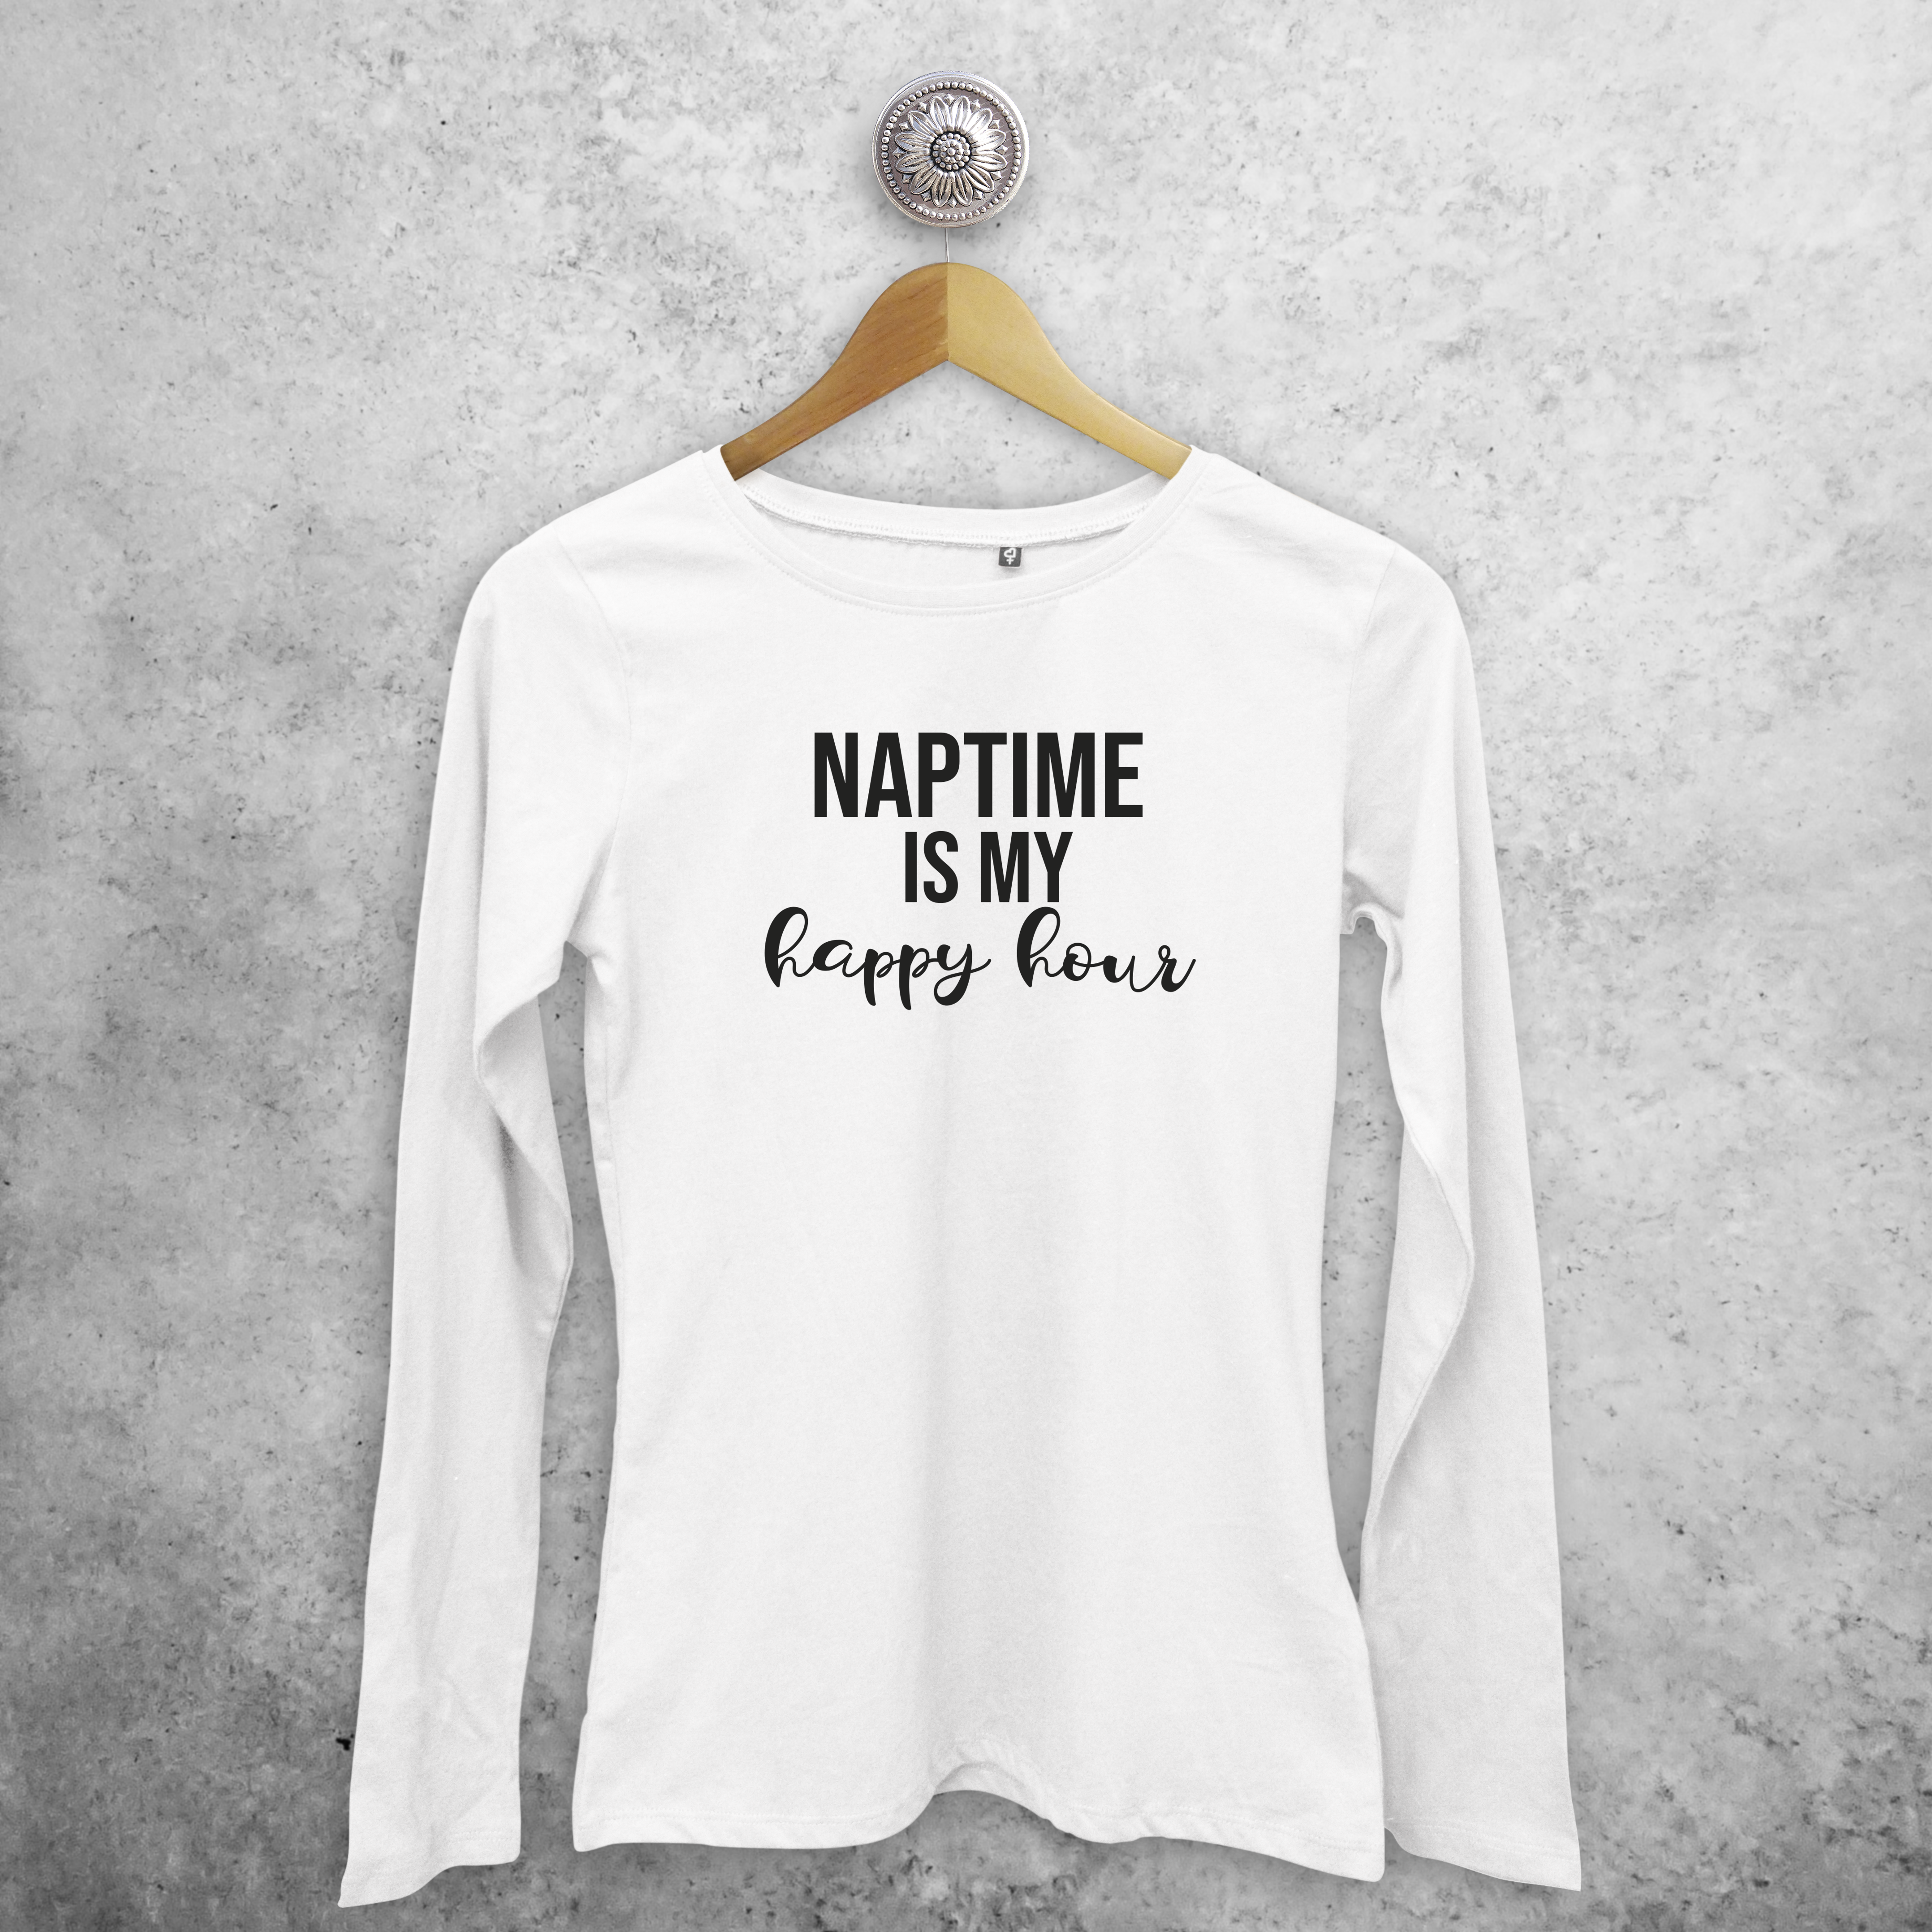 'Naptime is my happy hour' adult longsleeve shirt